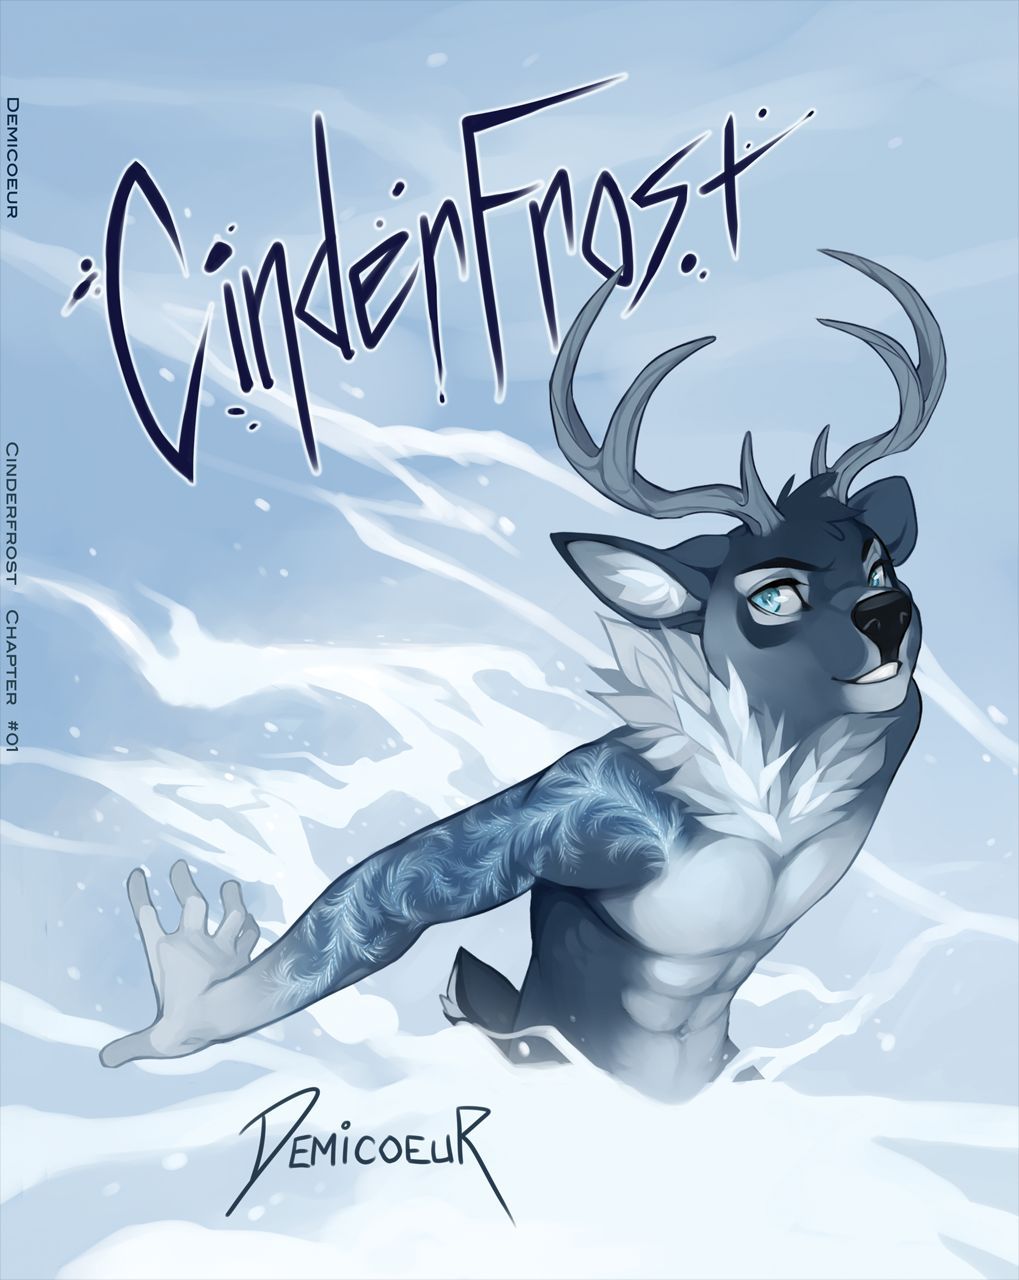 [Demicoeur] CinderFrost (Ongoing) 1